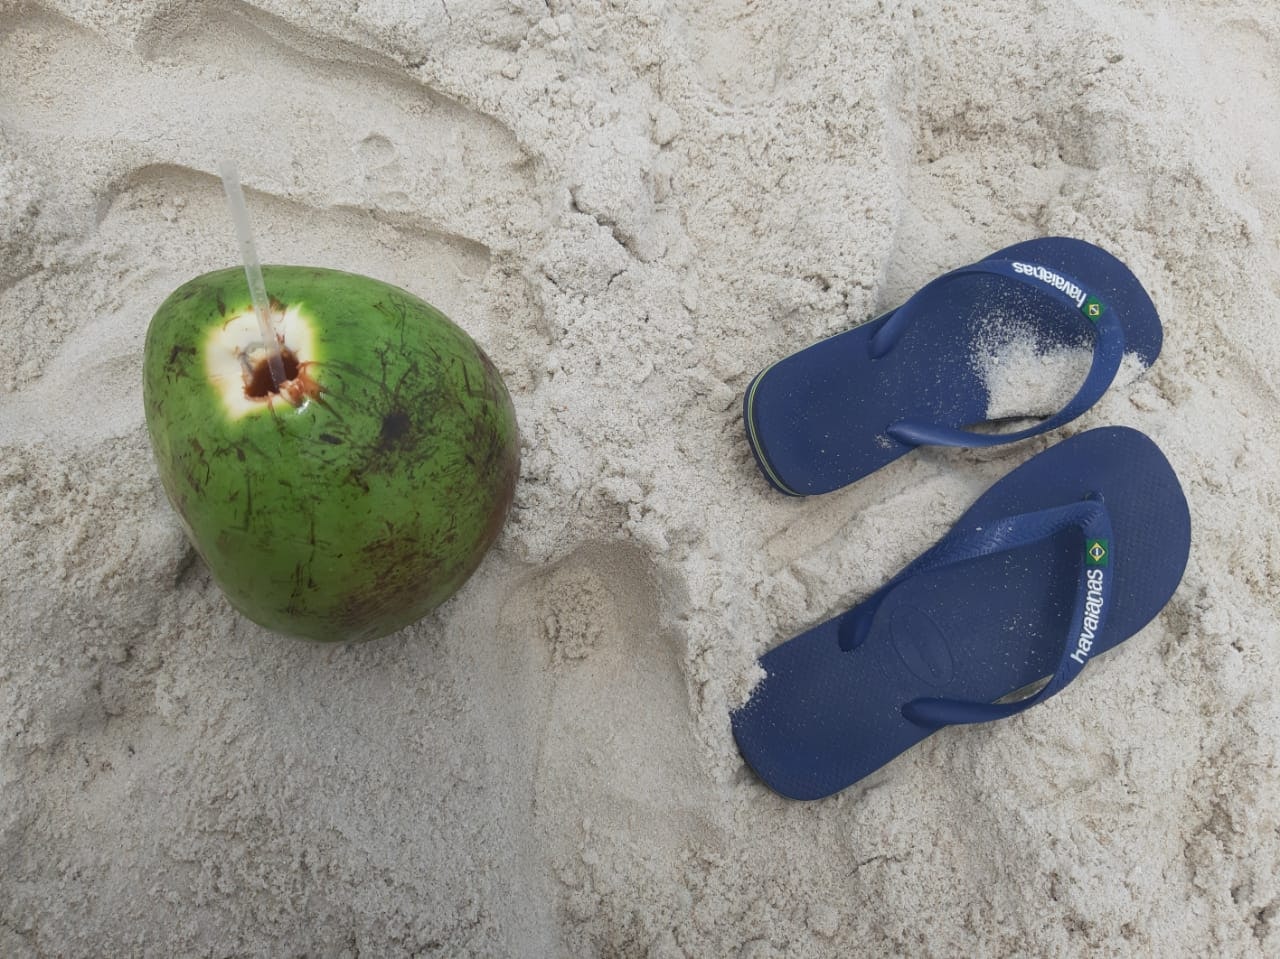 A coconut with a straw in it and a pair of flip flops on the sand